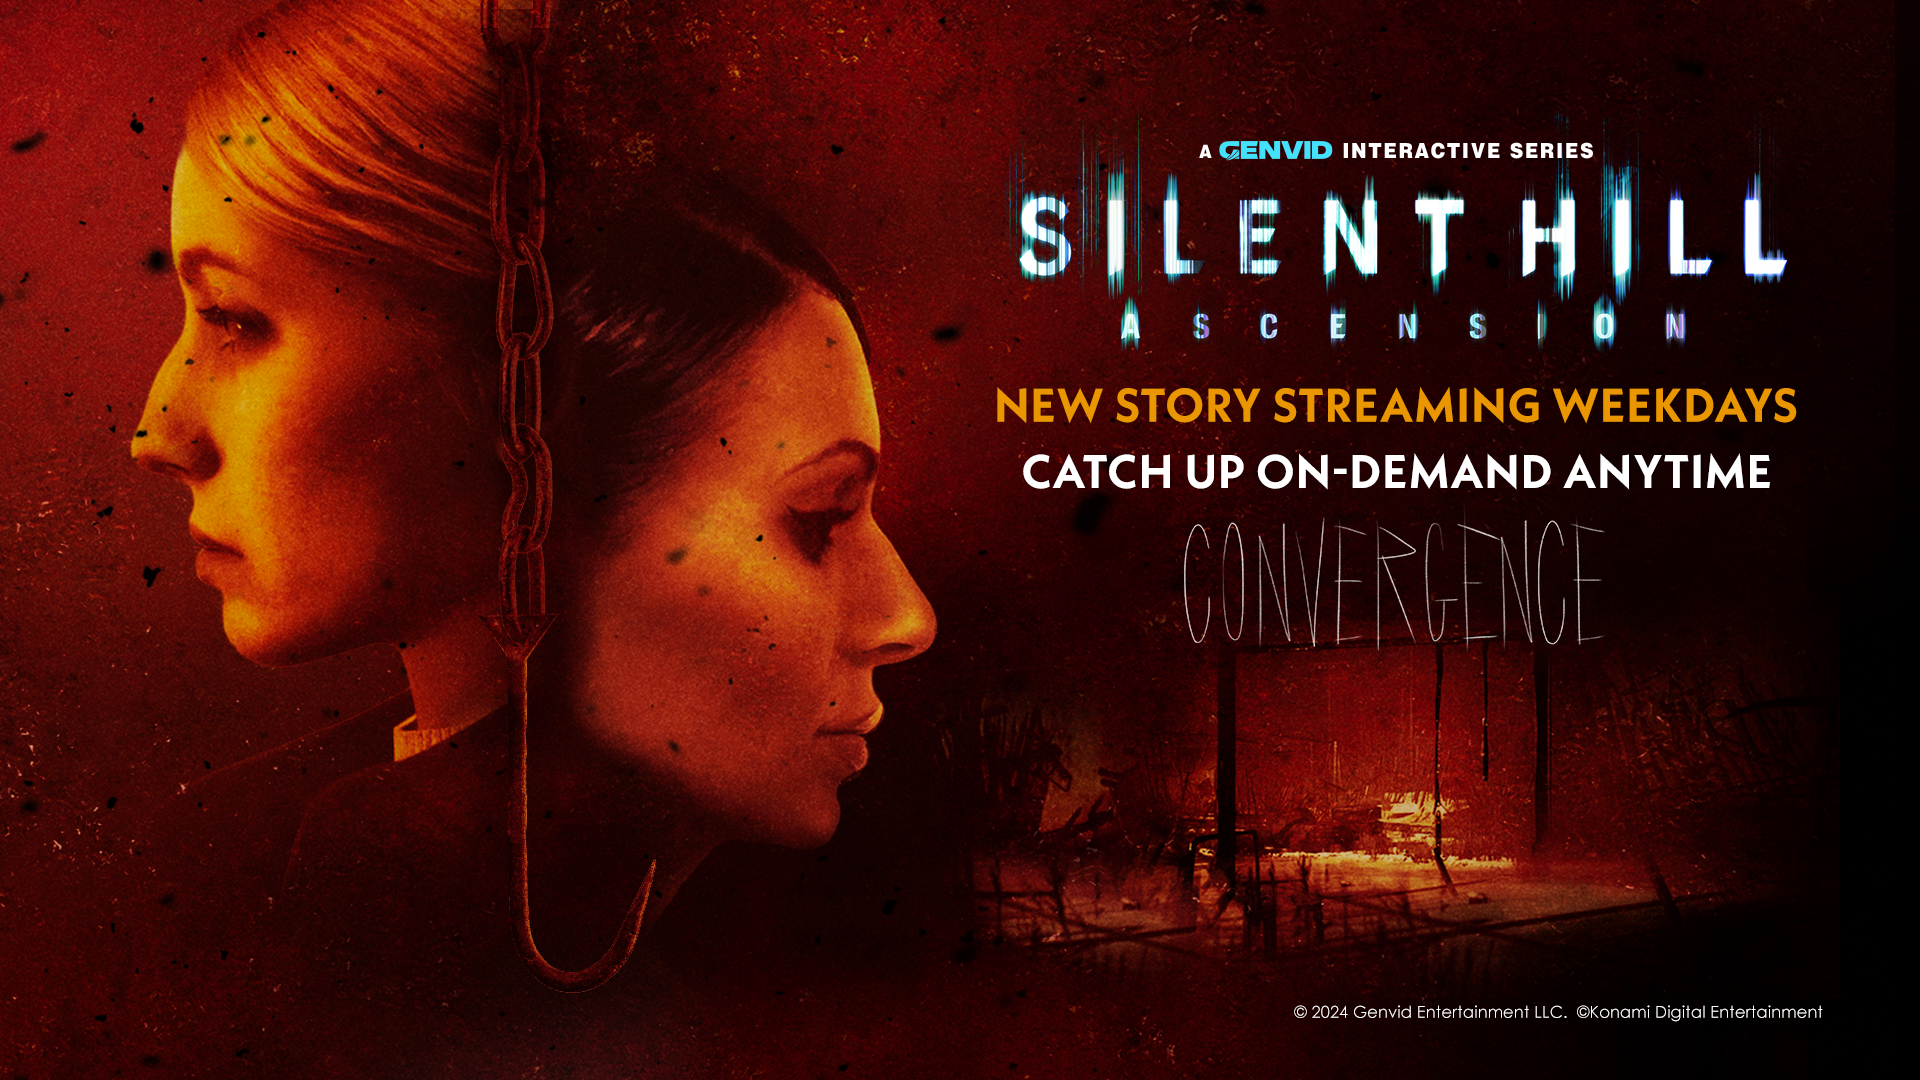 SILENT HILL: Ascension is back with new story to watch